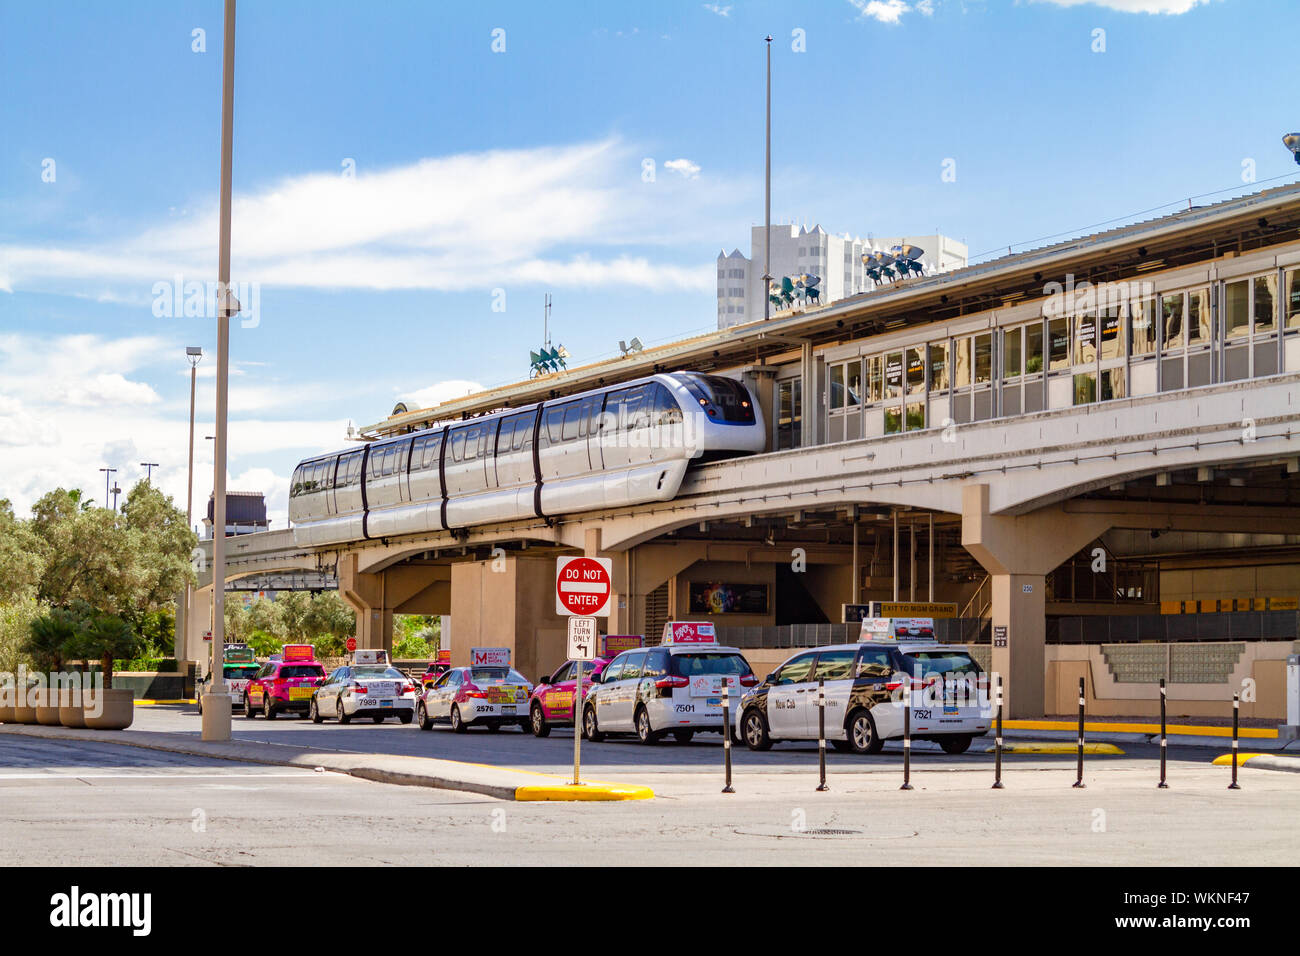 Las Vegas, NV / USA – May 11, 2019: Monorail station and a line of waiting taxis cabs at the  rear of the MGM Grand Hotel in Las Vegas, Nevada. Stock Photo